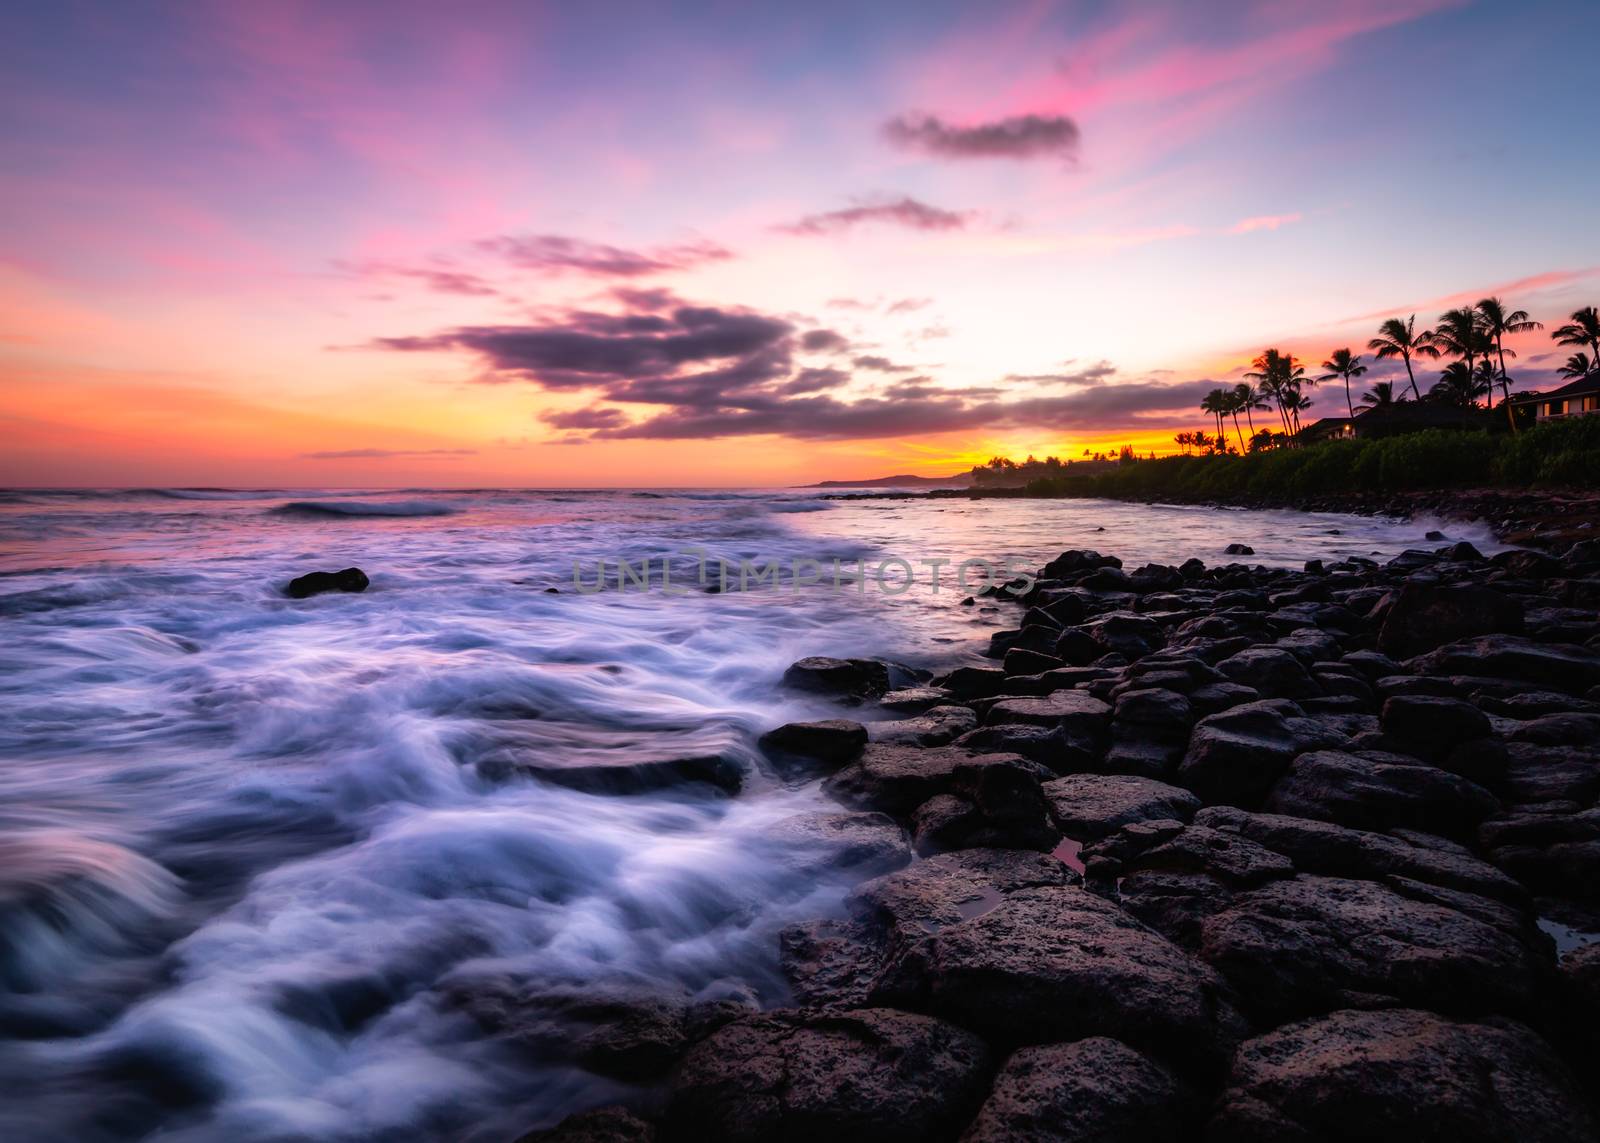 Evening Sunset at a Tropical Rocky Beach by backyard_photography